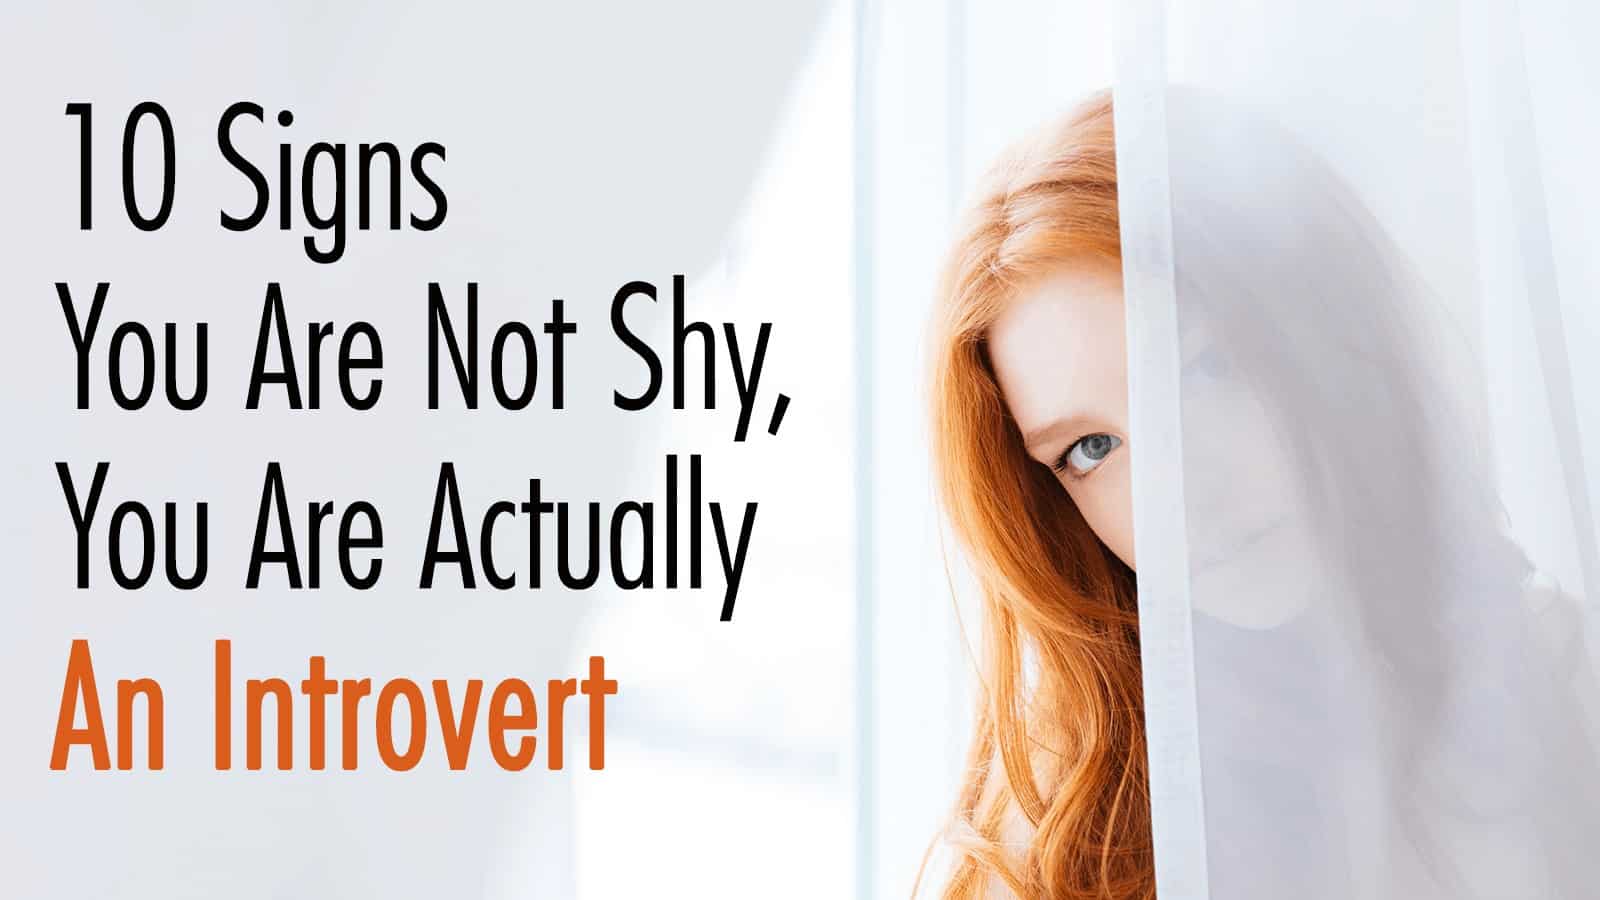 Signs you are an introvert